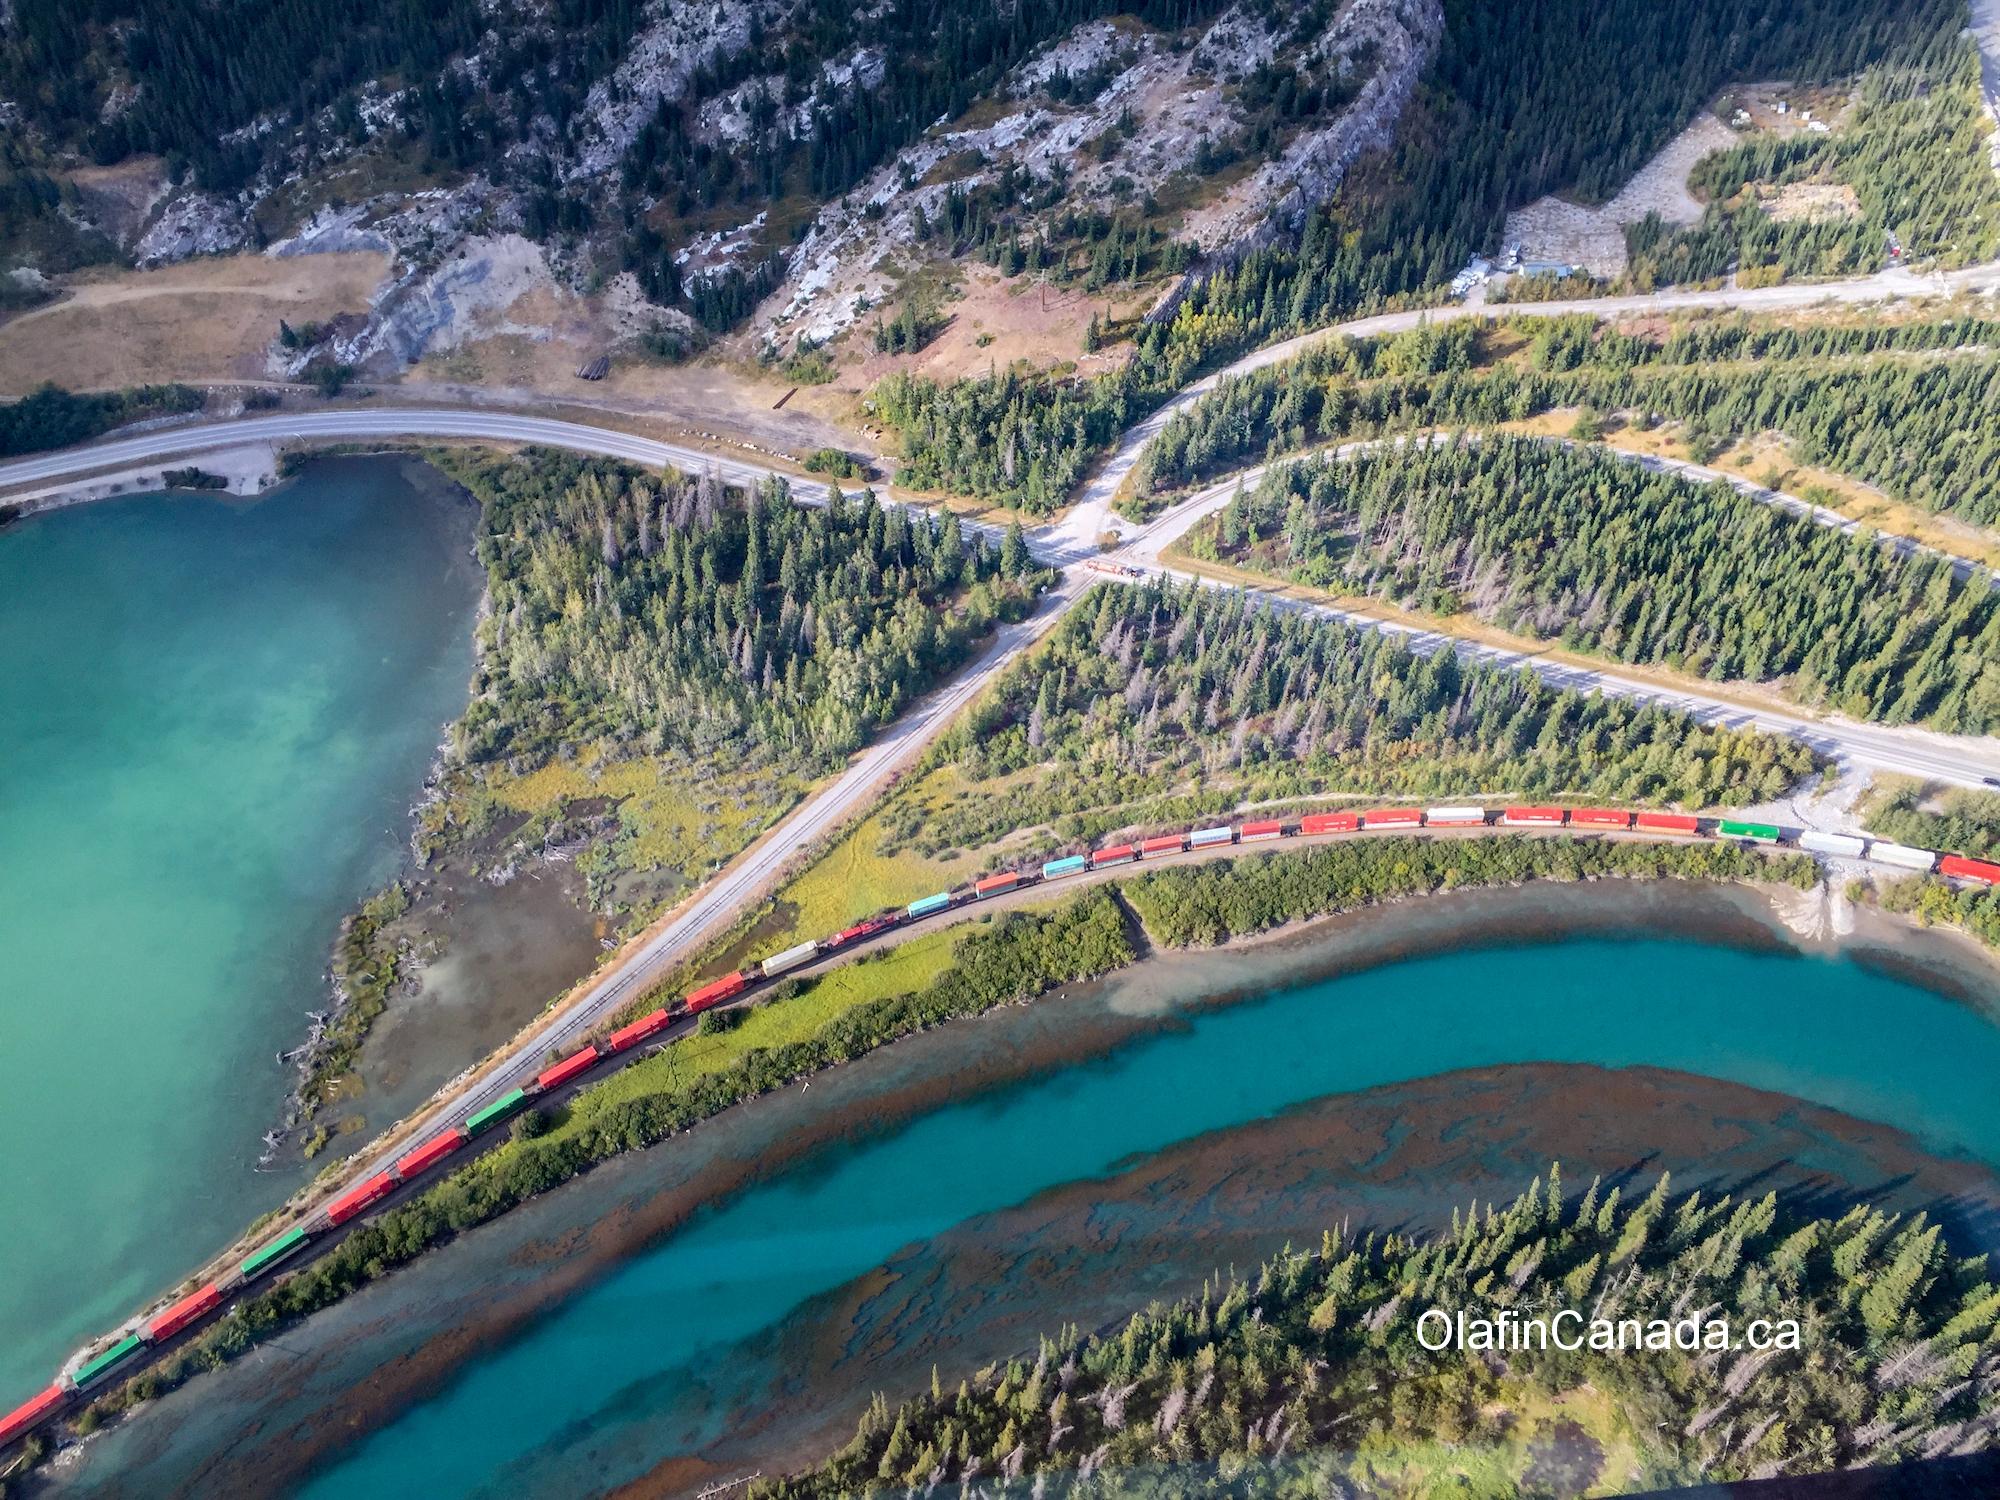 Train from helicopter #olafincanada #britishcolumbia #discoverbc #helicopterview